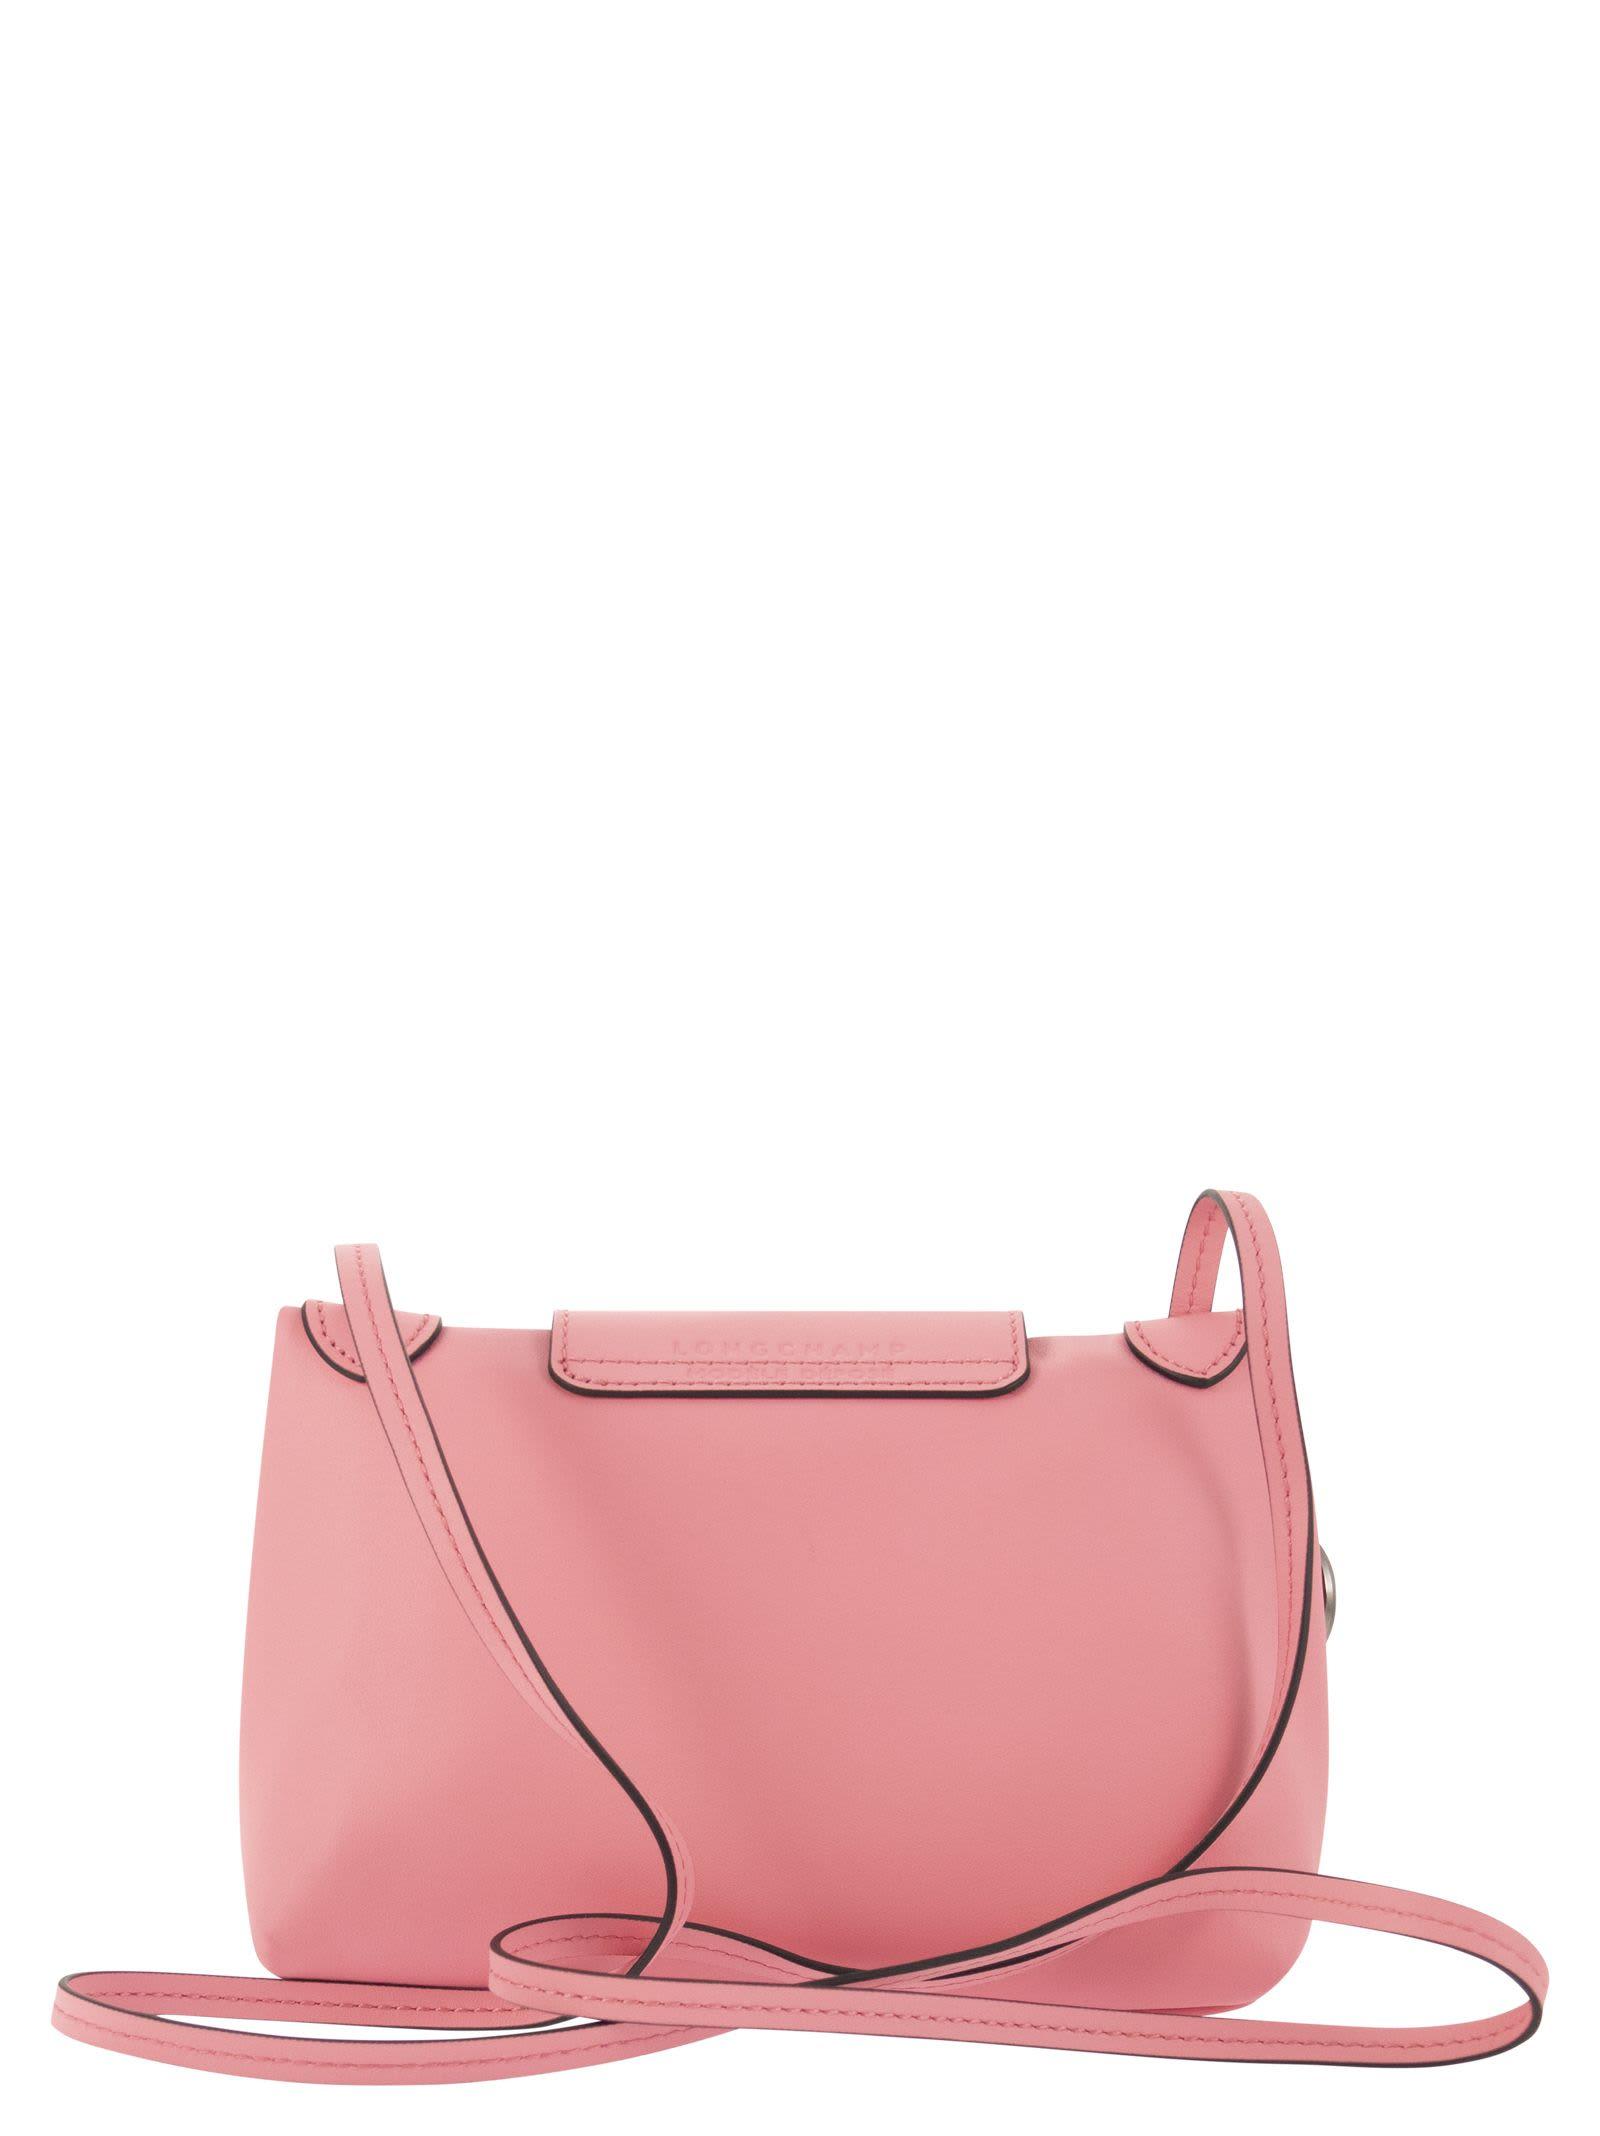 Longchamp Extra Small Le Pliage Leather Crossbody Bag in Pink